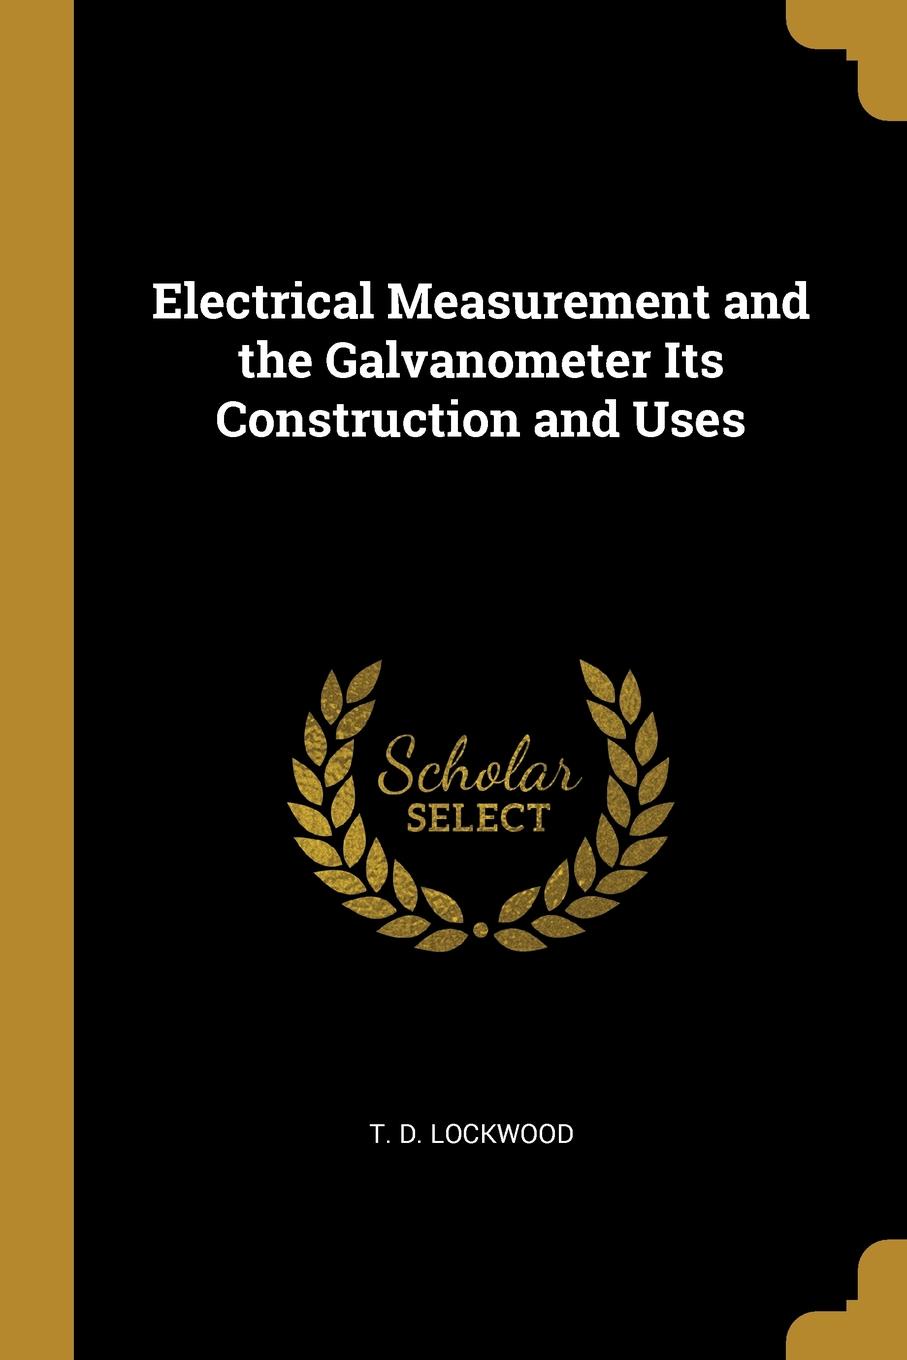 Electrical Measurement and the Galvanometer Its Construction and Uses